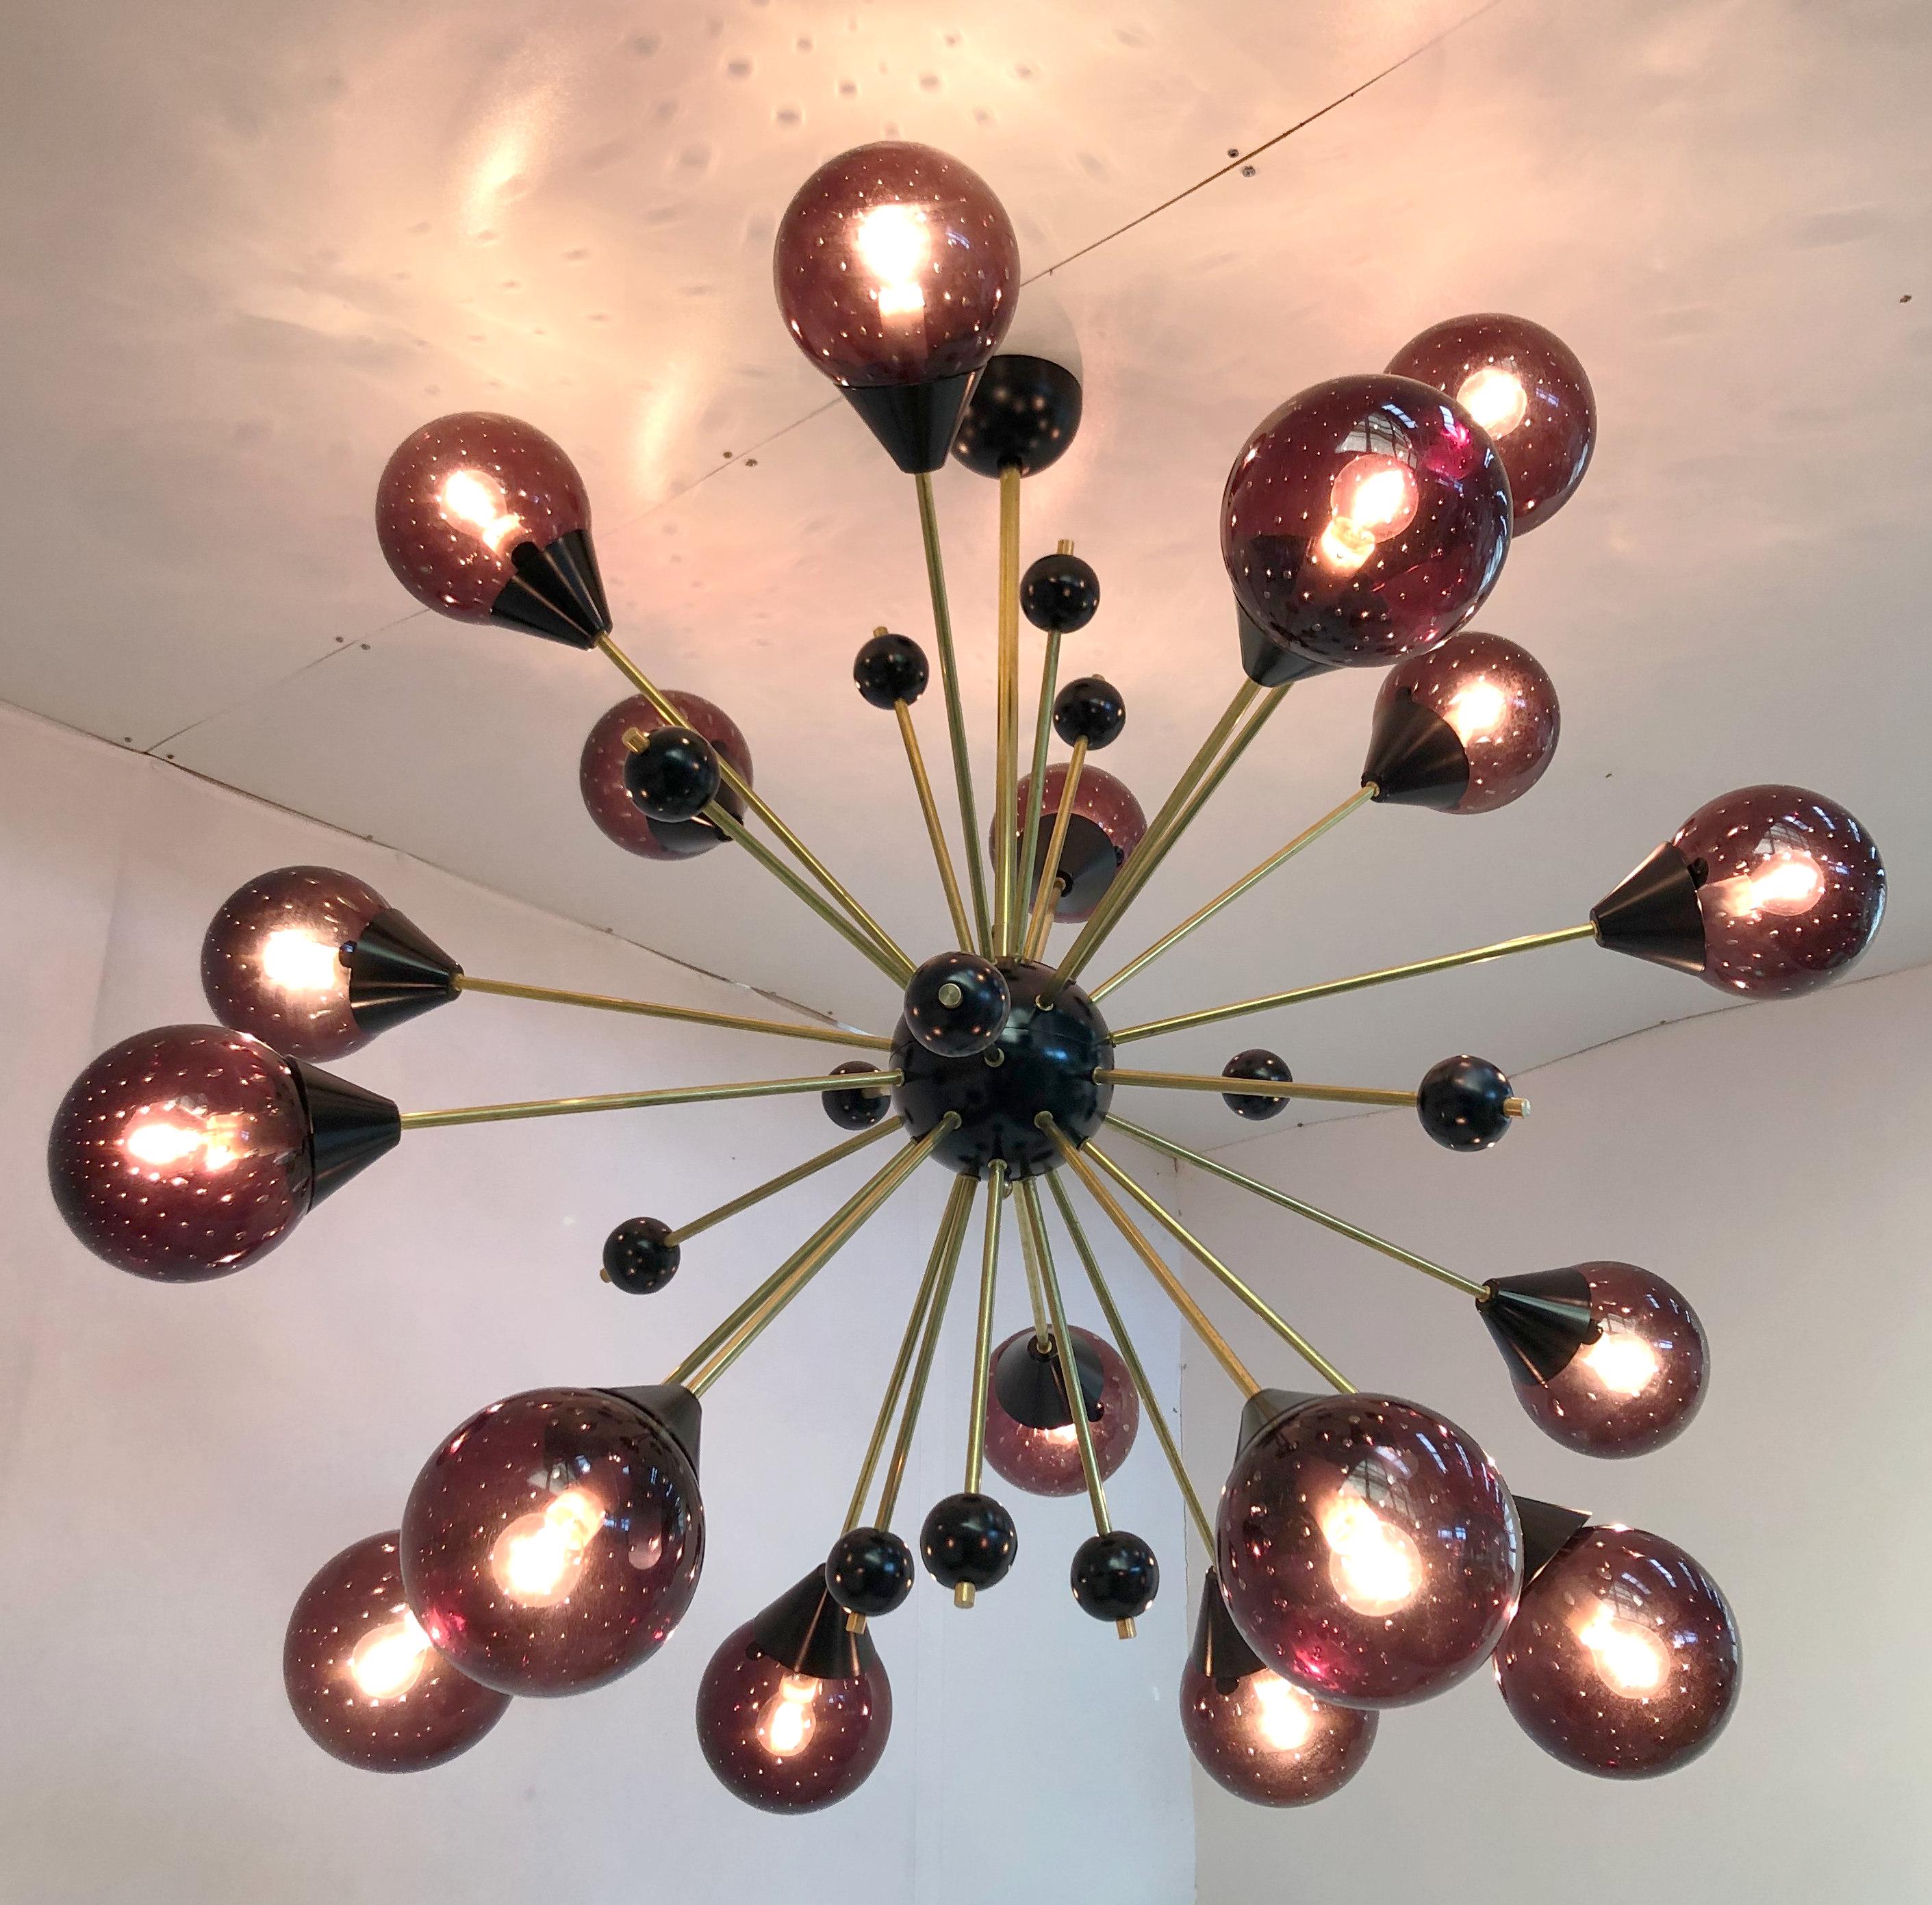 Italian midcentury style Sputnik chandelier with 18 amethyst Murano glass globes with carefully blown bubbles within the glass using Bollicine technique, mounted on unlacquered natural brass stems, with small black decorative globes, black center